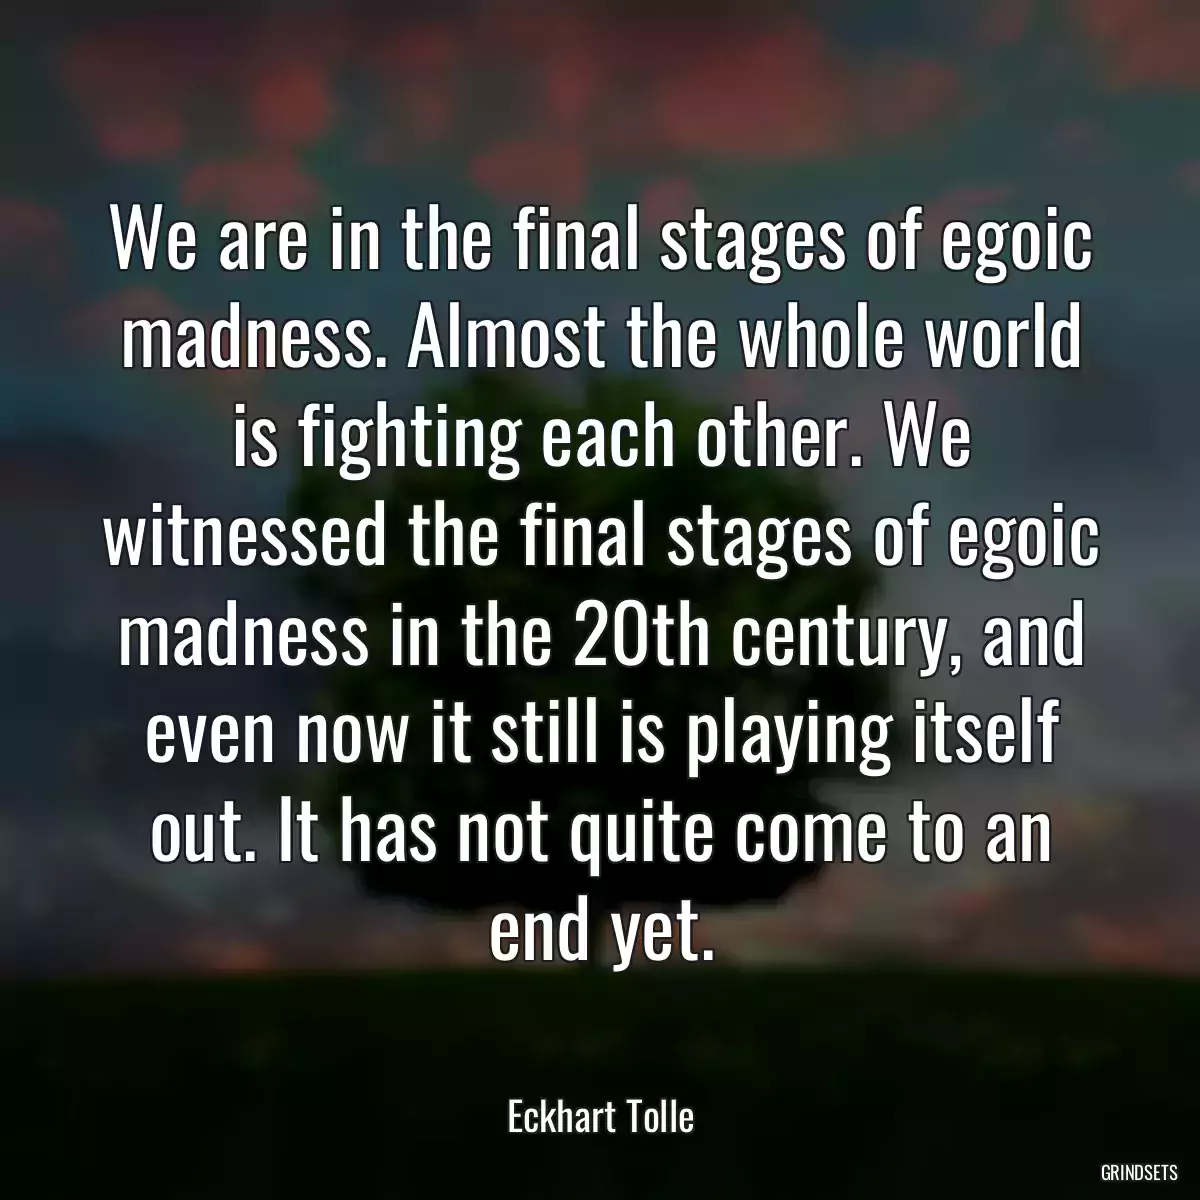 We are in the final stages of egoic madness. Almost the whole world is fighting each other. We witnessed the final stages of egoic madness in the 20th century, and even now it still is playing itself out. It has not quite come to an end yet.